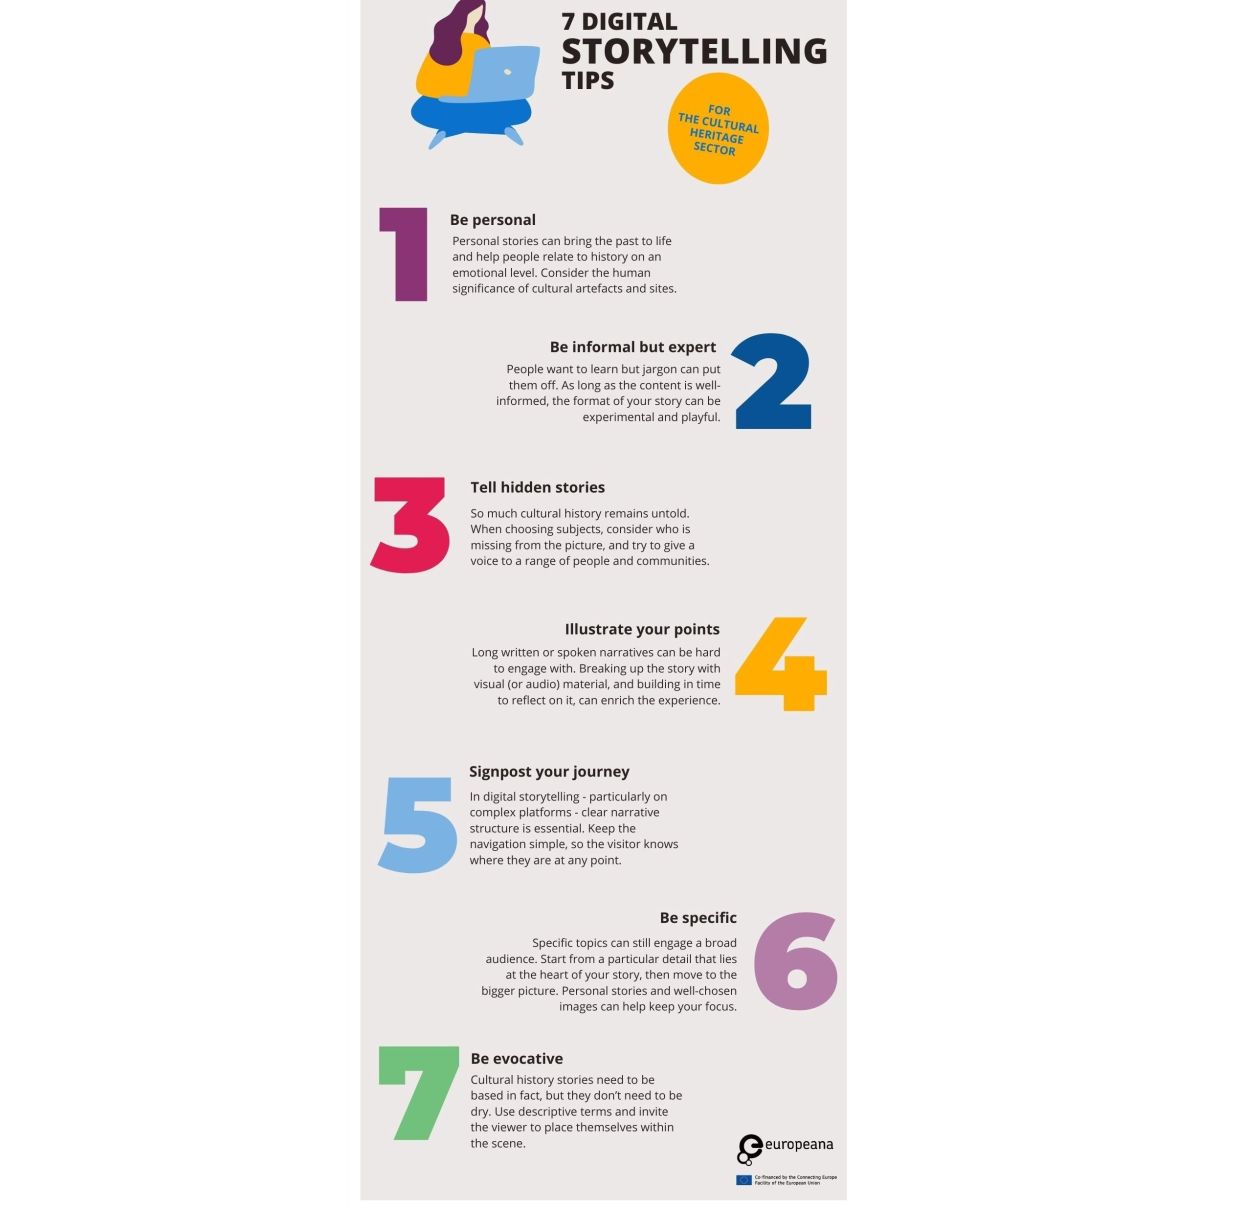 7 tips for Digital Storytelling: 1. Be personal 2. Be informal but expert 3.Tell those hidden stories 4. Illustrate your points 5. Signpost your journey 6. Be specific 7. Be evocative